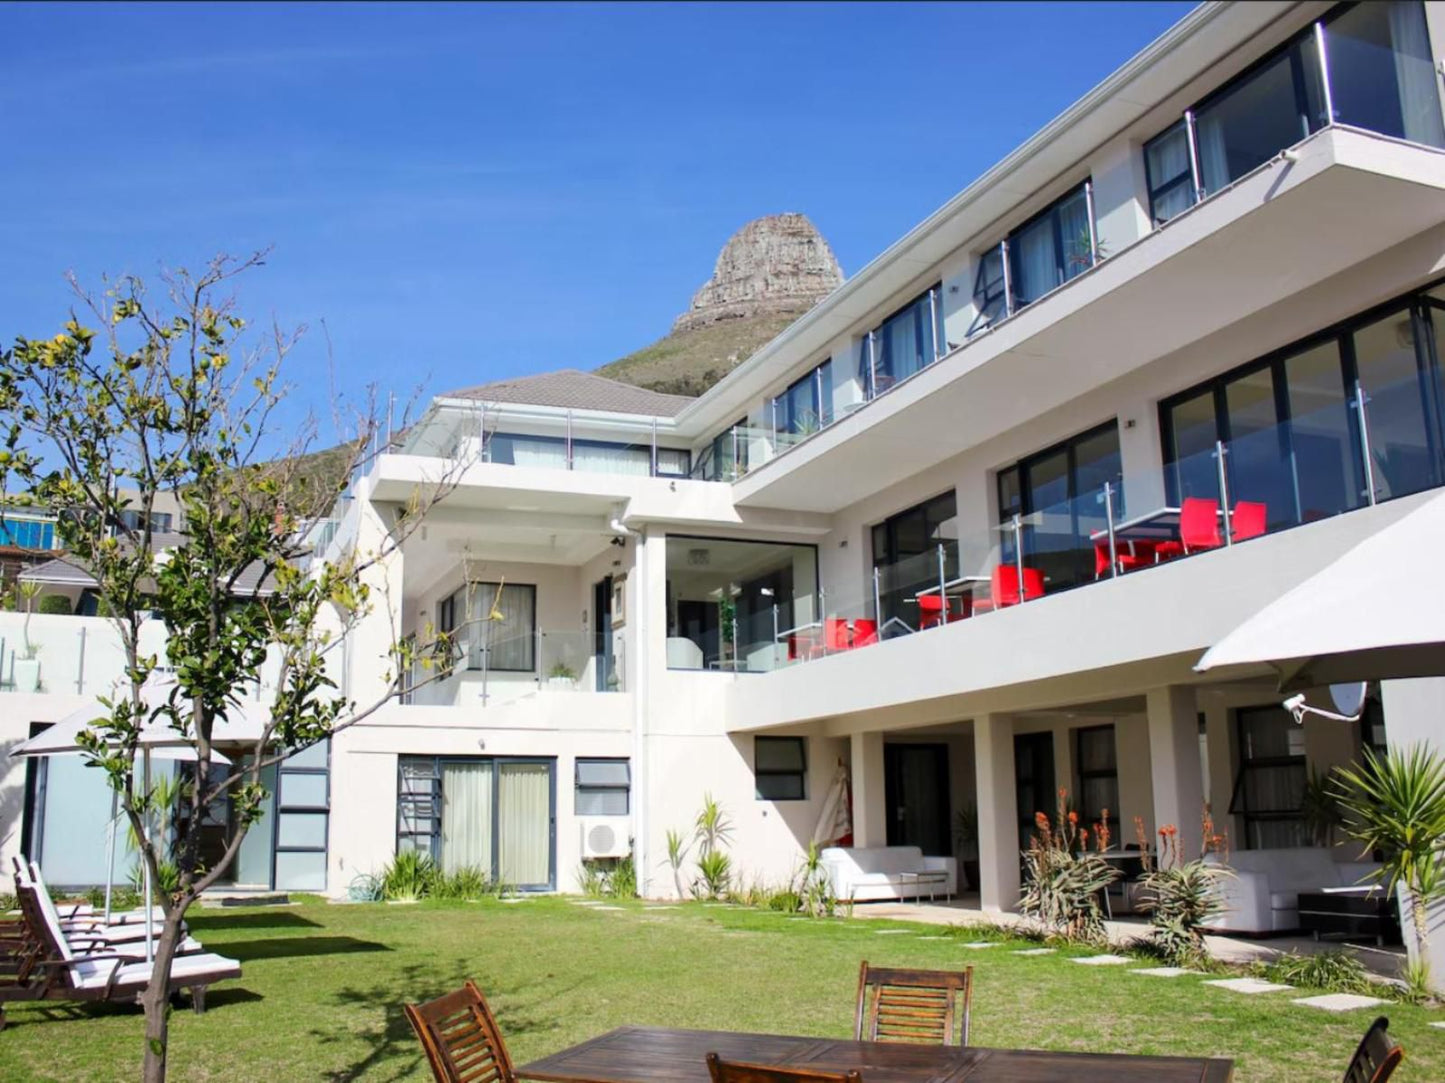 Grande Kloof Boutique Hotel Fresnaye Cape Town Western Cape South Africa House, Building, Architecture